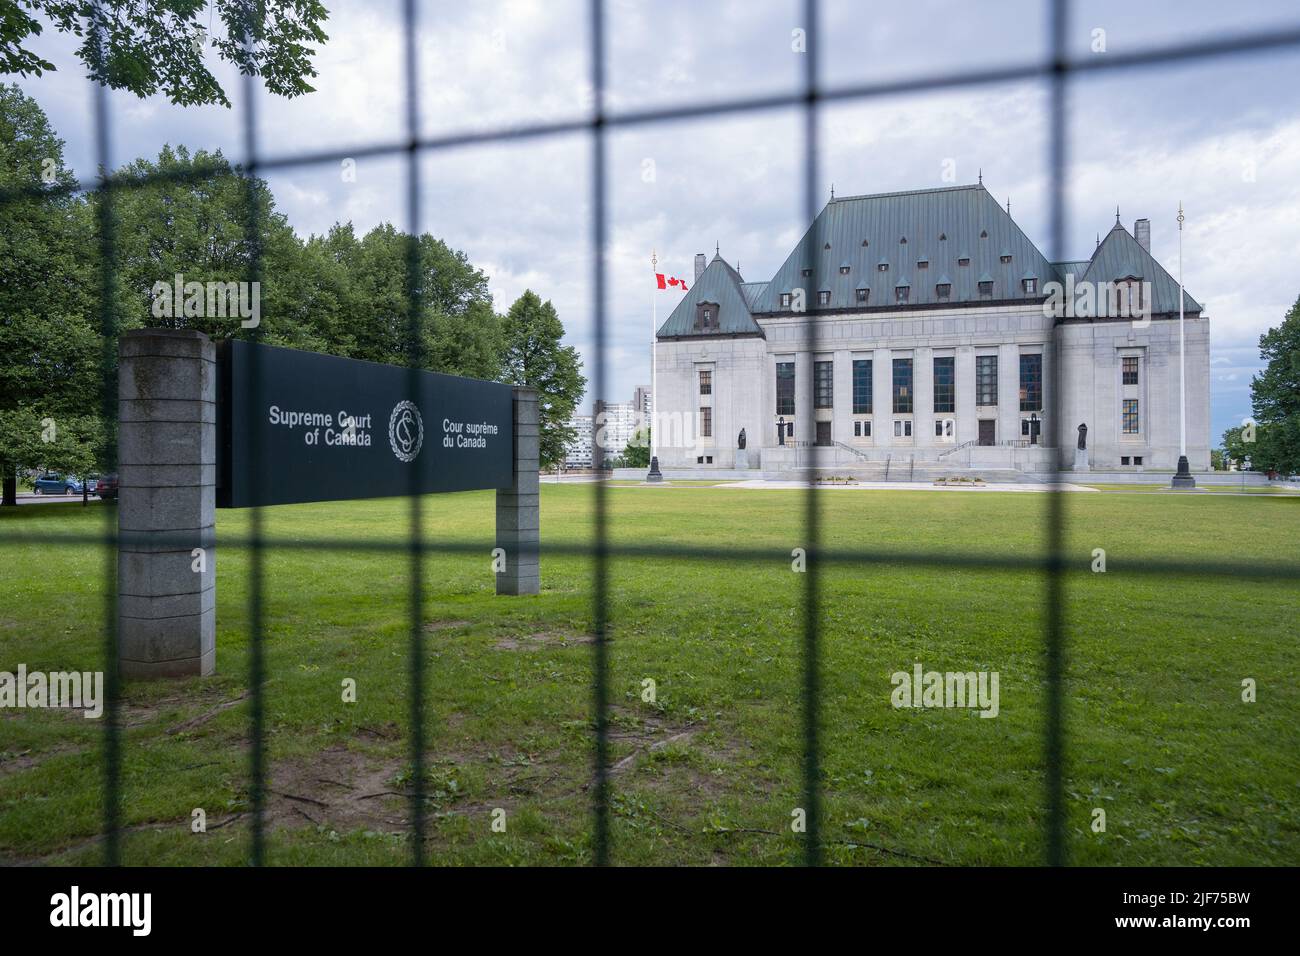 The Supreme Court of Canada in Ottawa fenced off ahead of planned Canada Day freedom rallies. Stock Photo